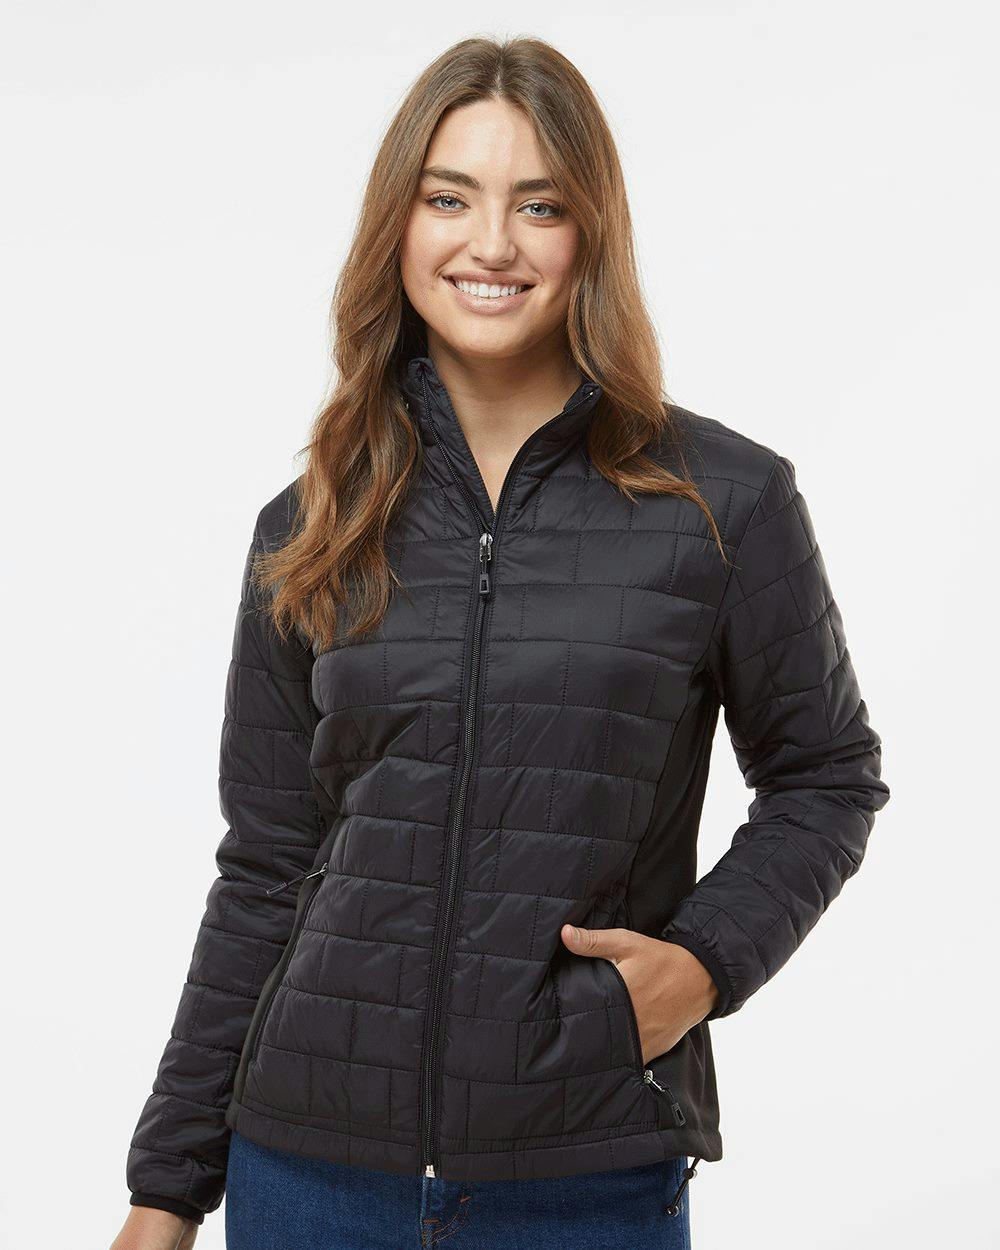 Image for Women's Element Puffer Jacket - 5713